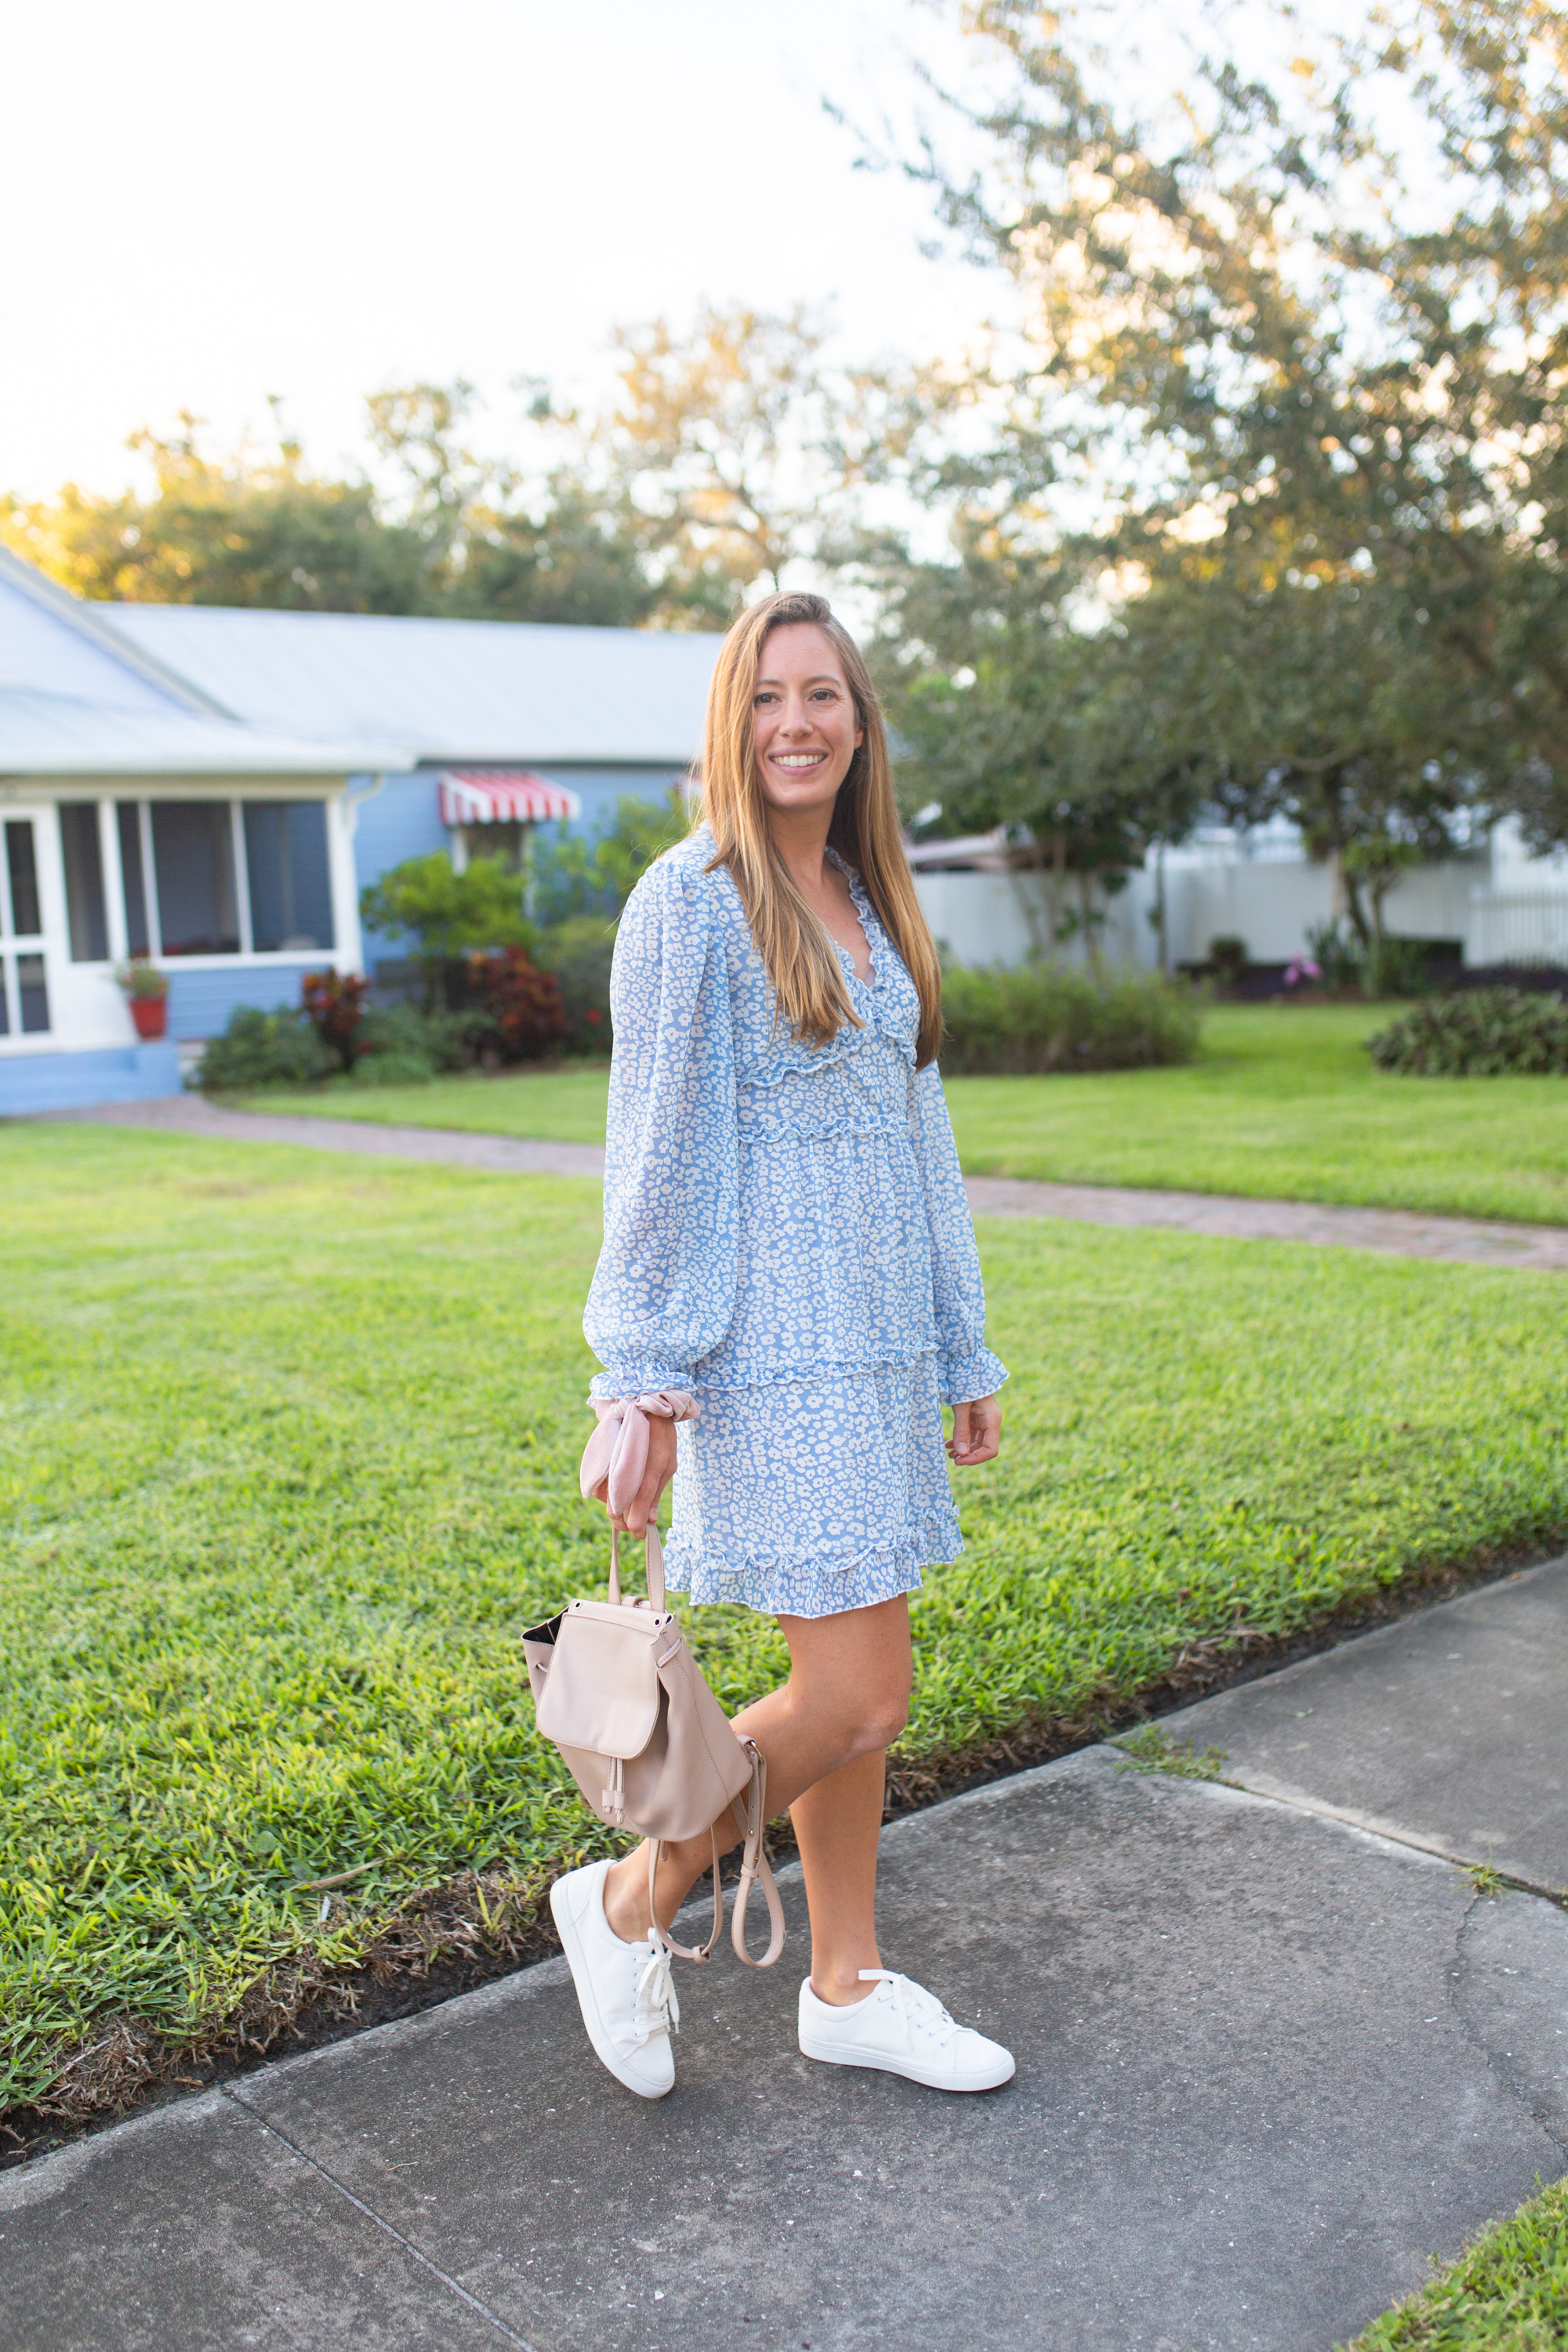 White Sneakers Outfit / Where to Buy the Best White Sneakers / White Sneakers with Dresses / How to Style White Sneakers  / White Sneakers Outfit Winter / Blue Dress - Sunshine Style, A Florida Fashion and Lifestyle Blog by Katie